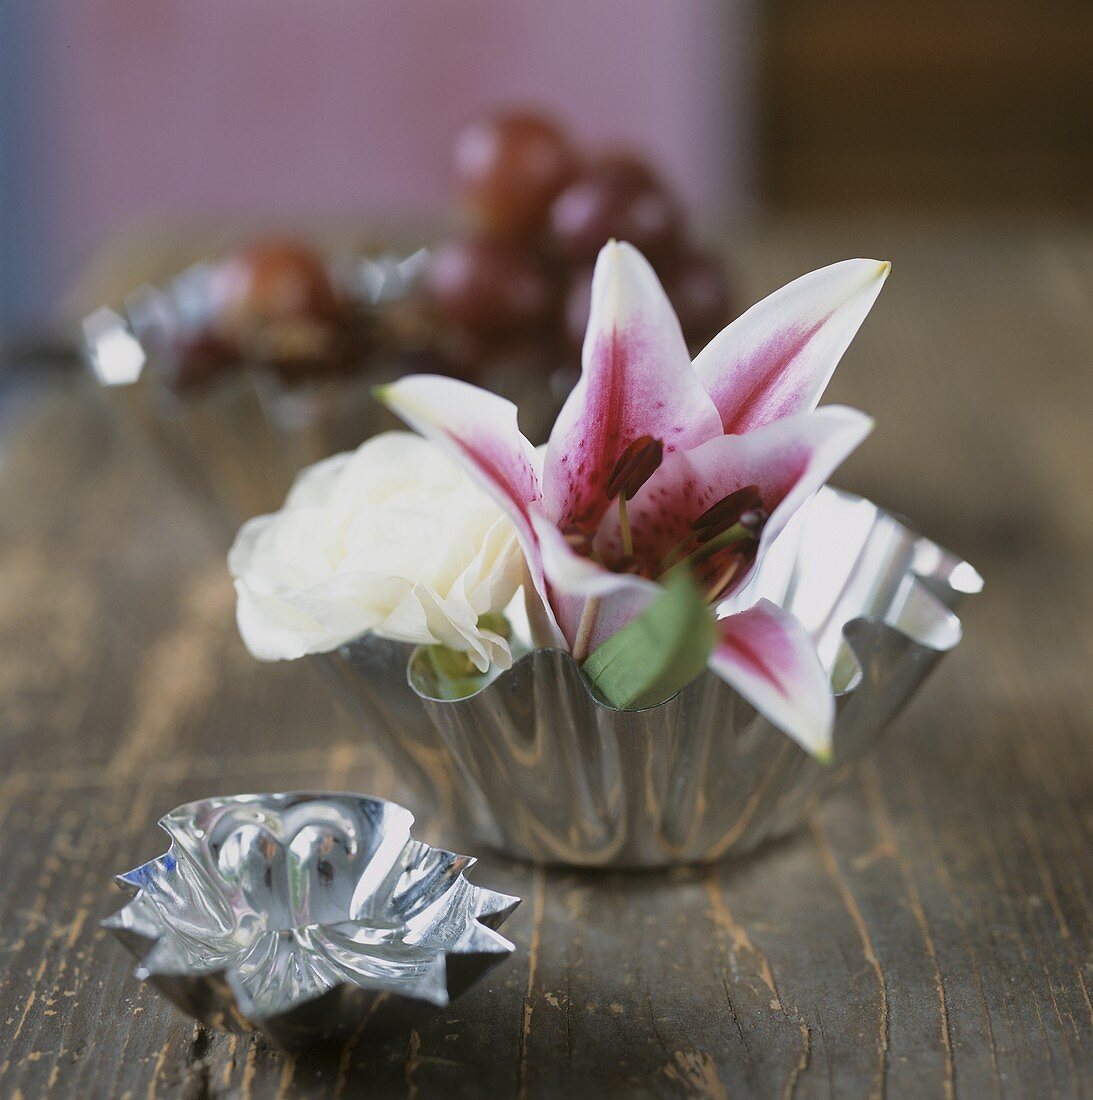 A lily and a white rose in a small silver bowl